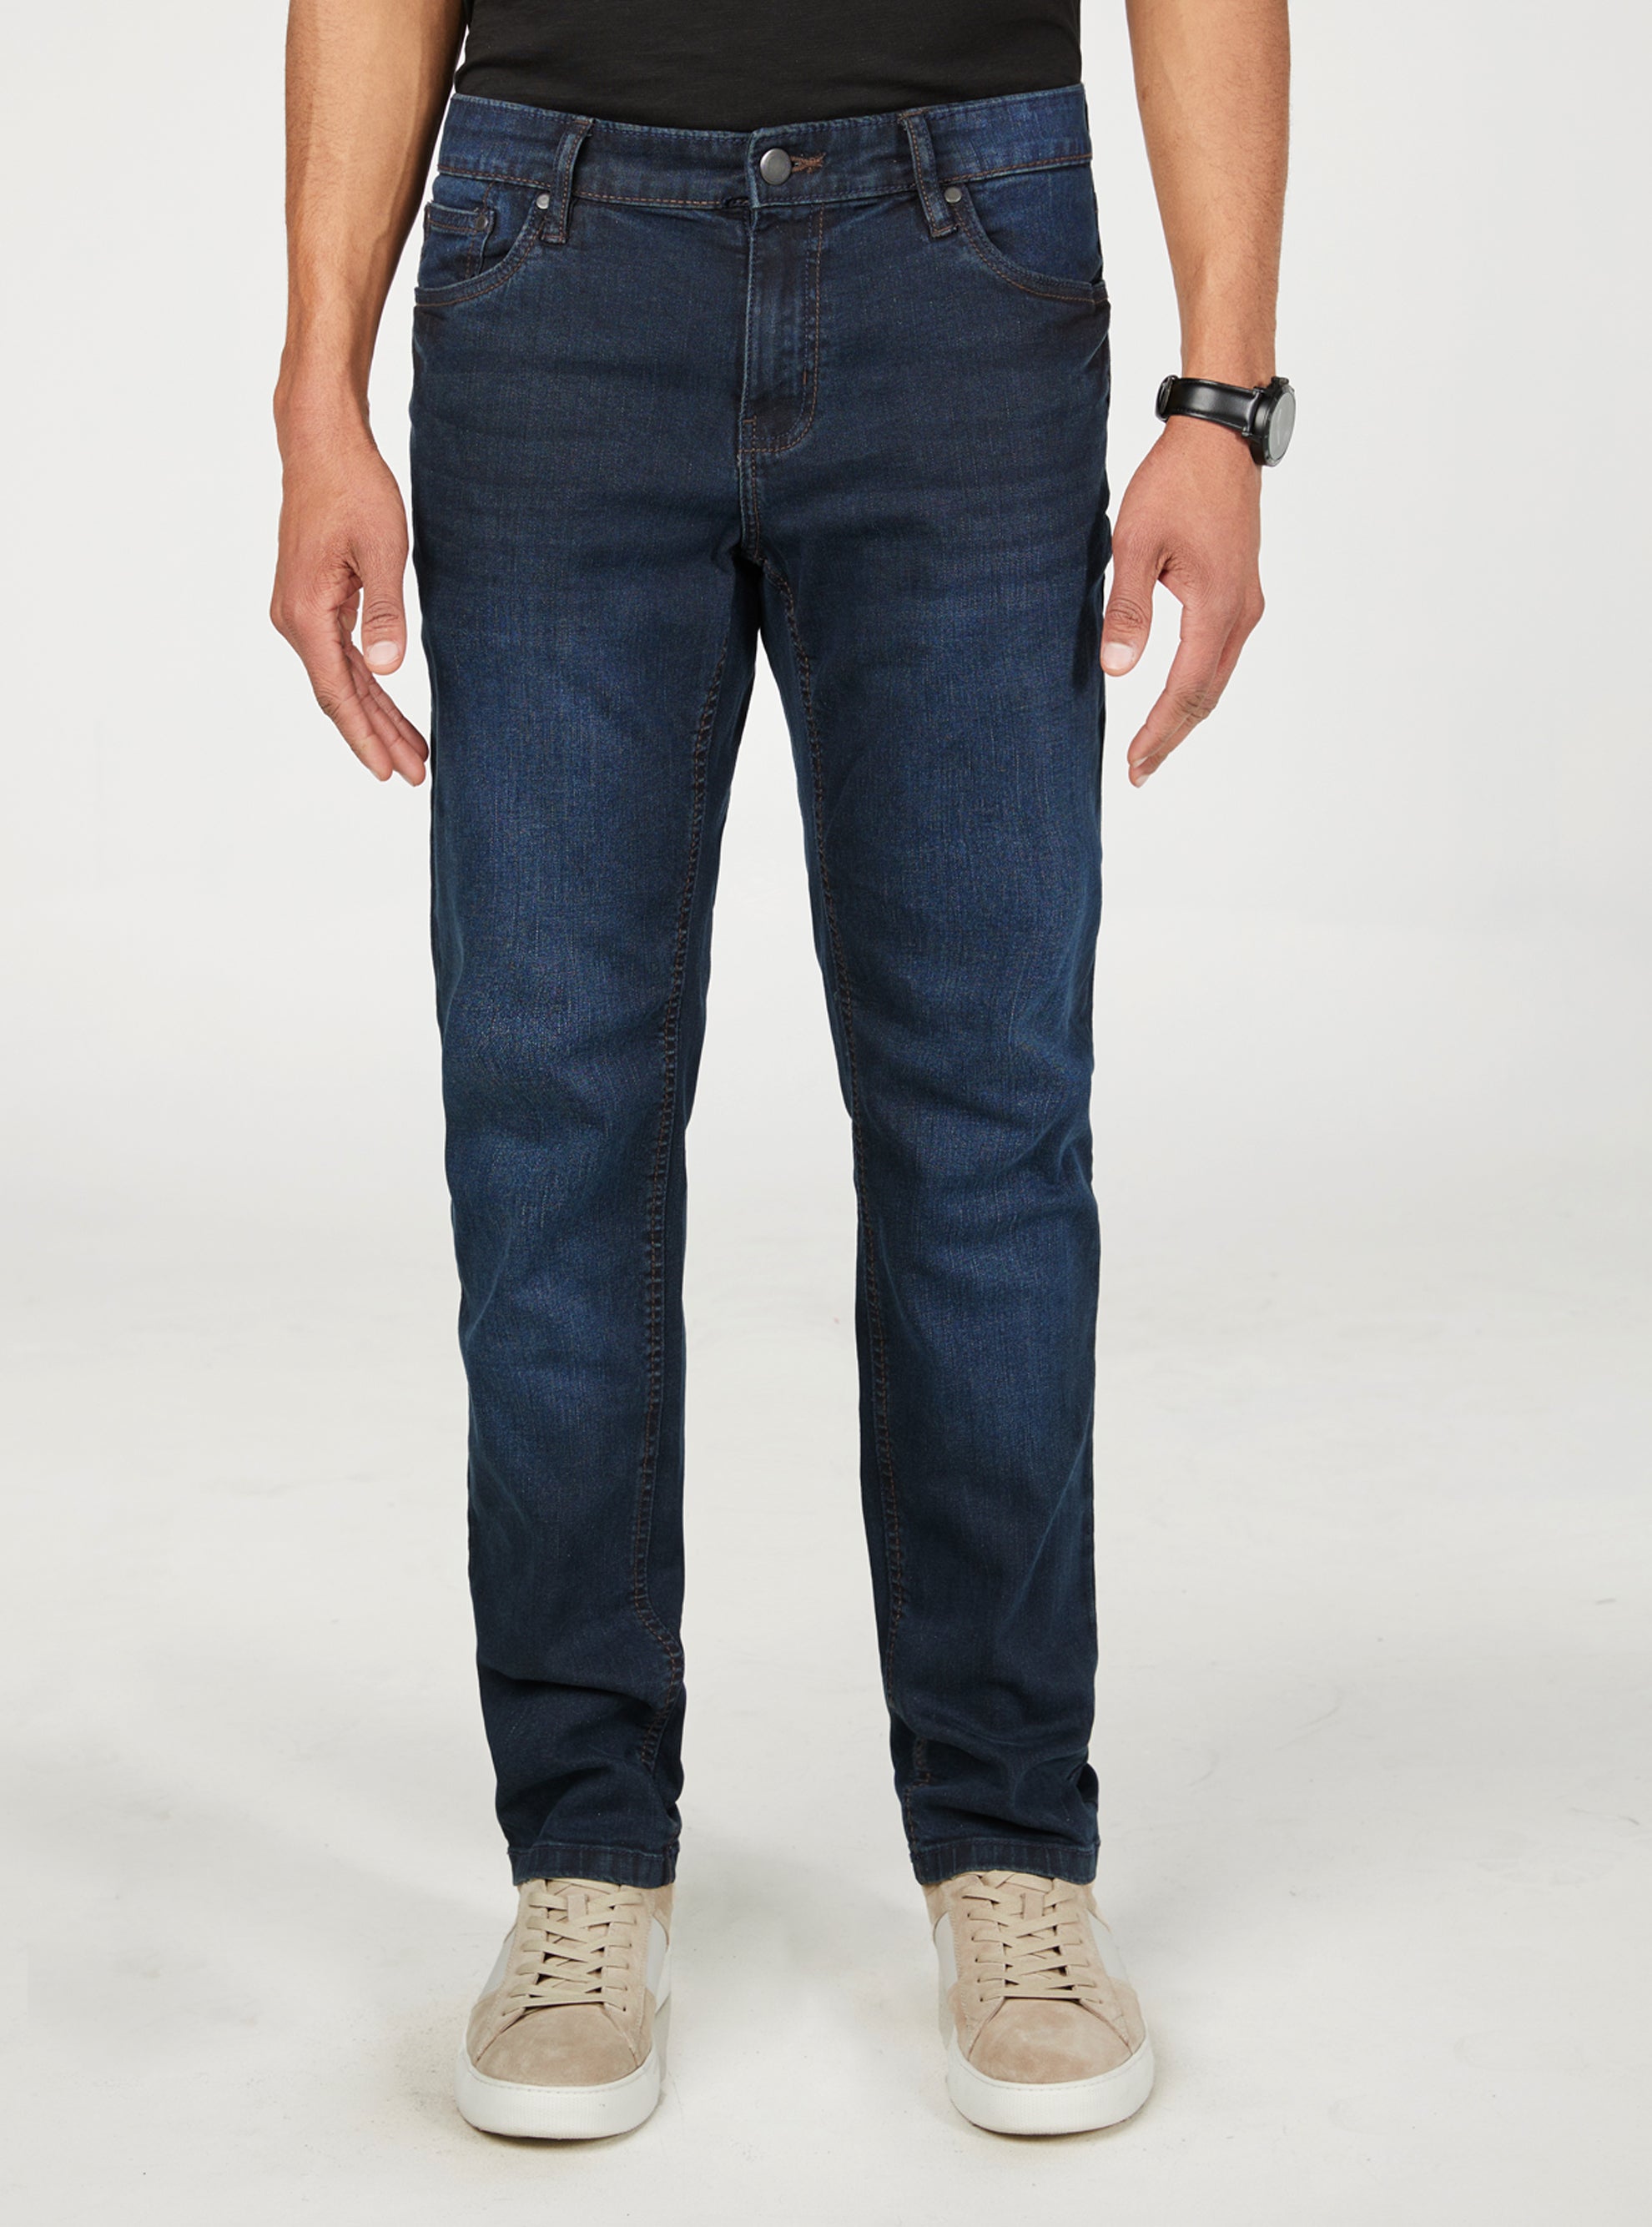 Blue men's jeans with contrasting detail